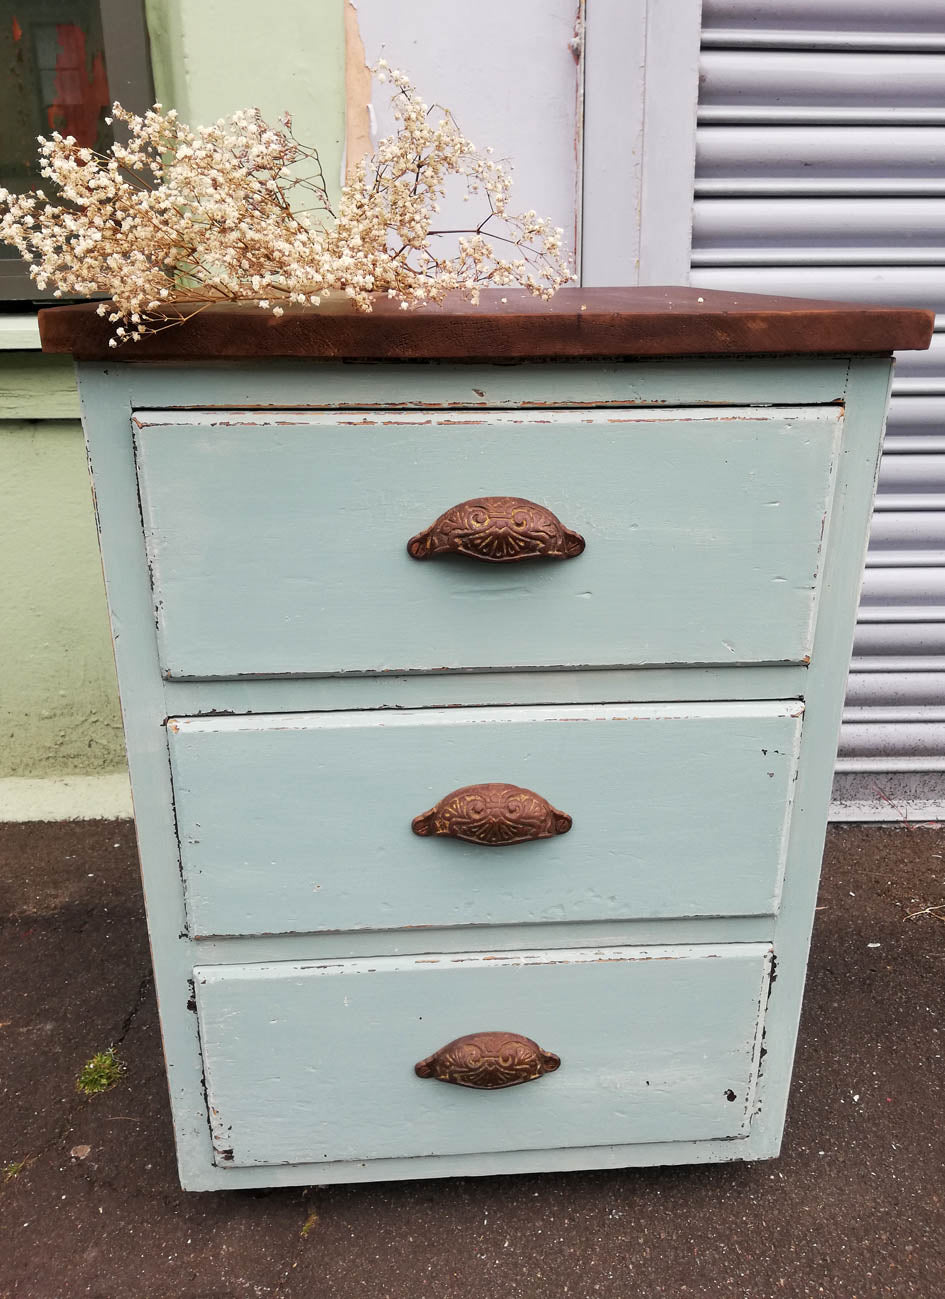 Rustic industrial set of drawers painted in a soft duck egg blue